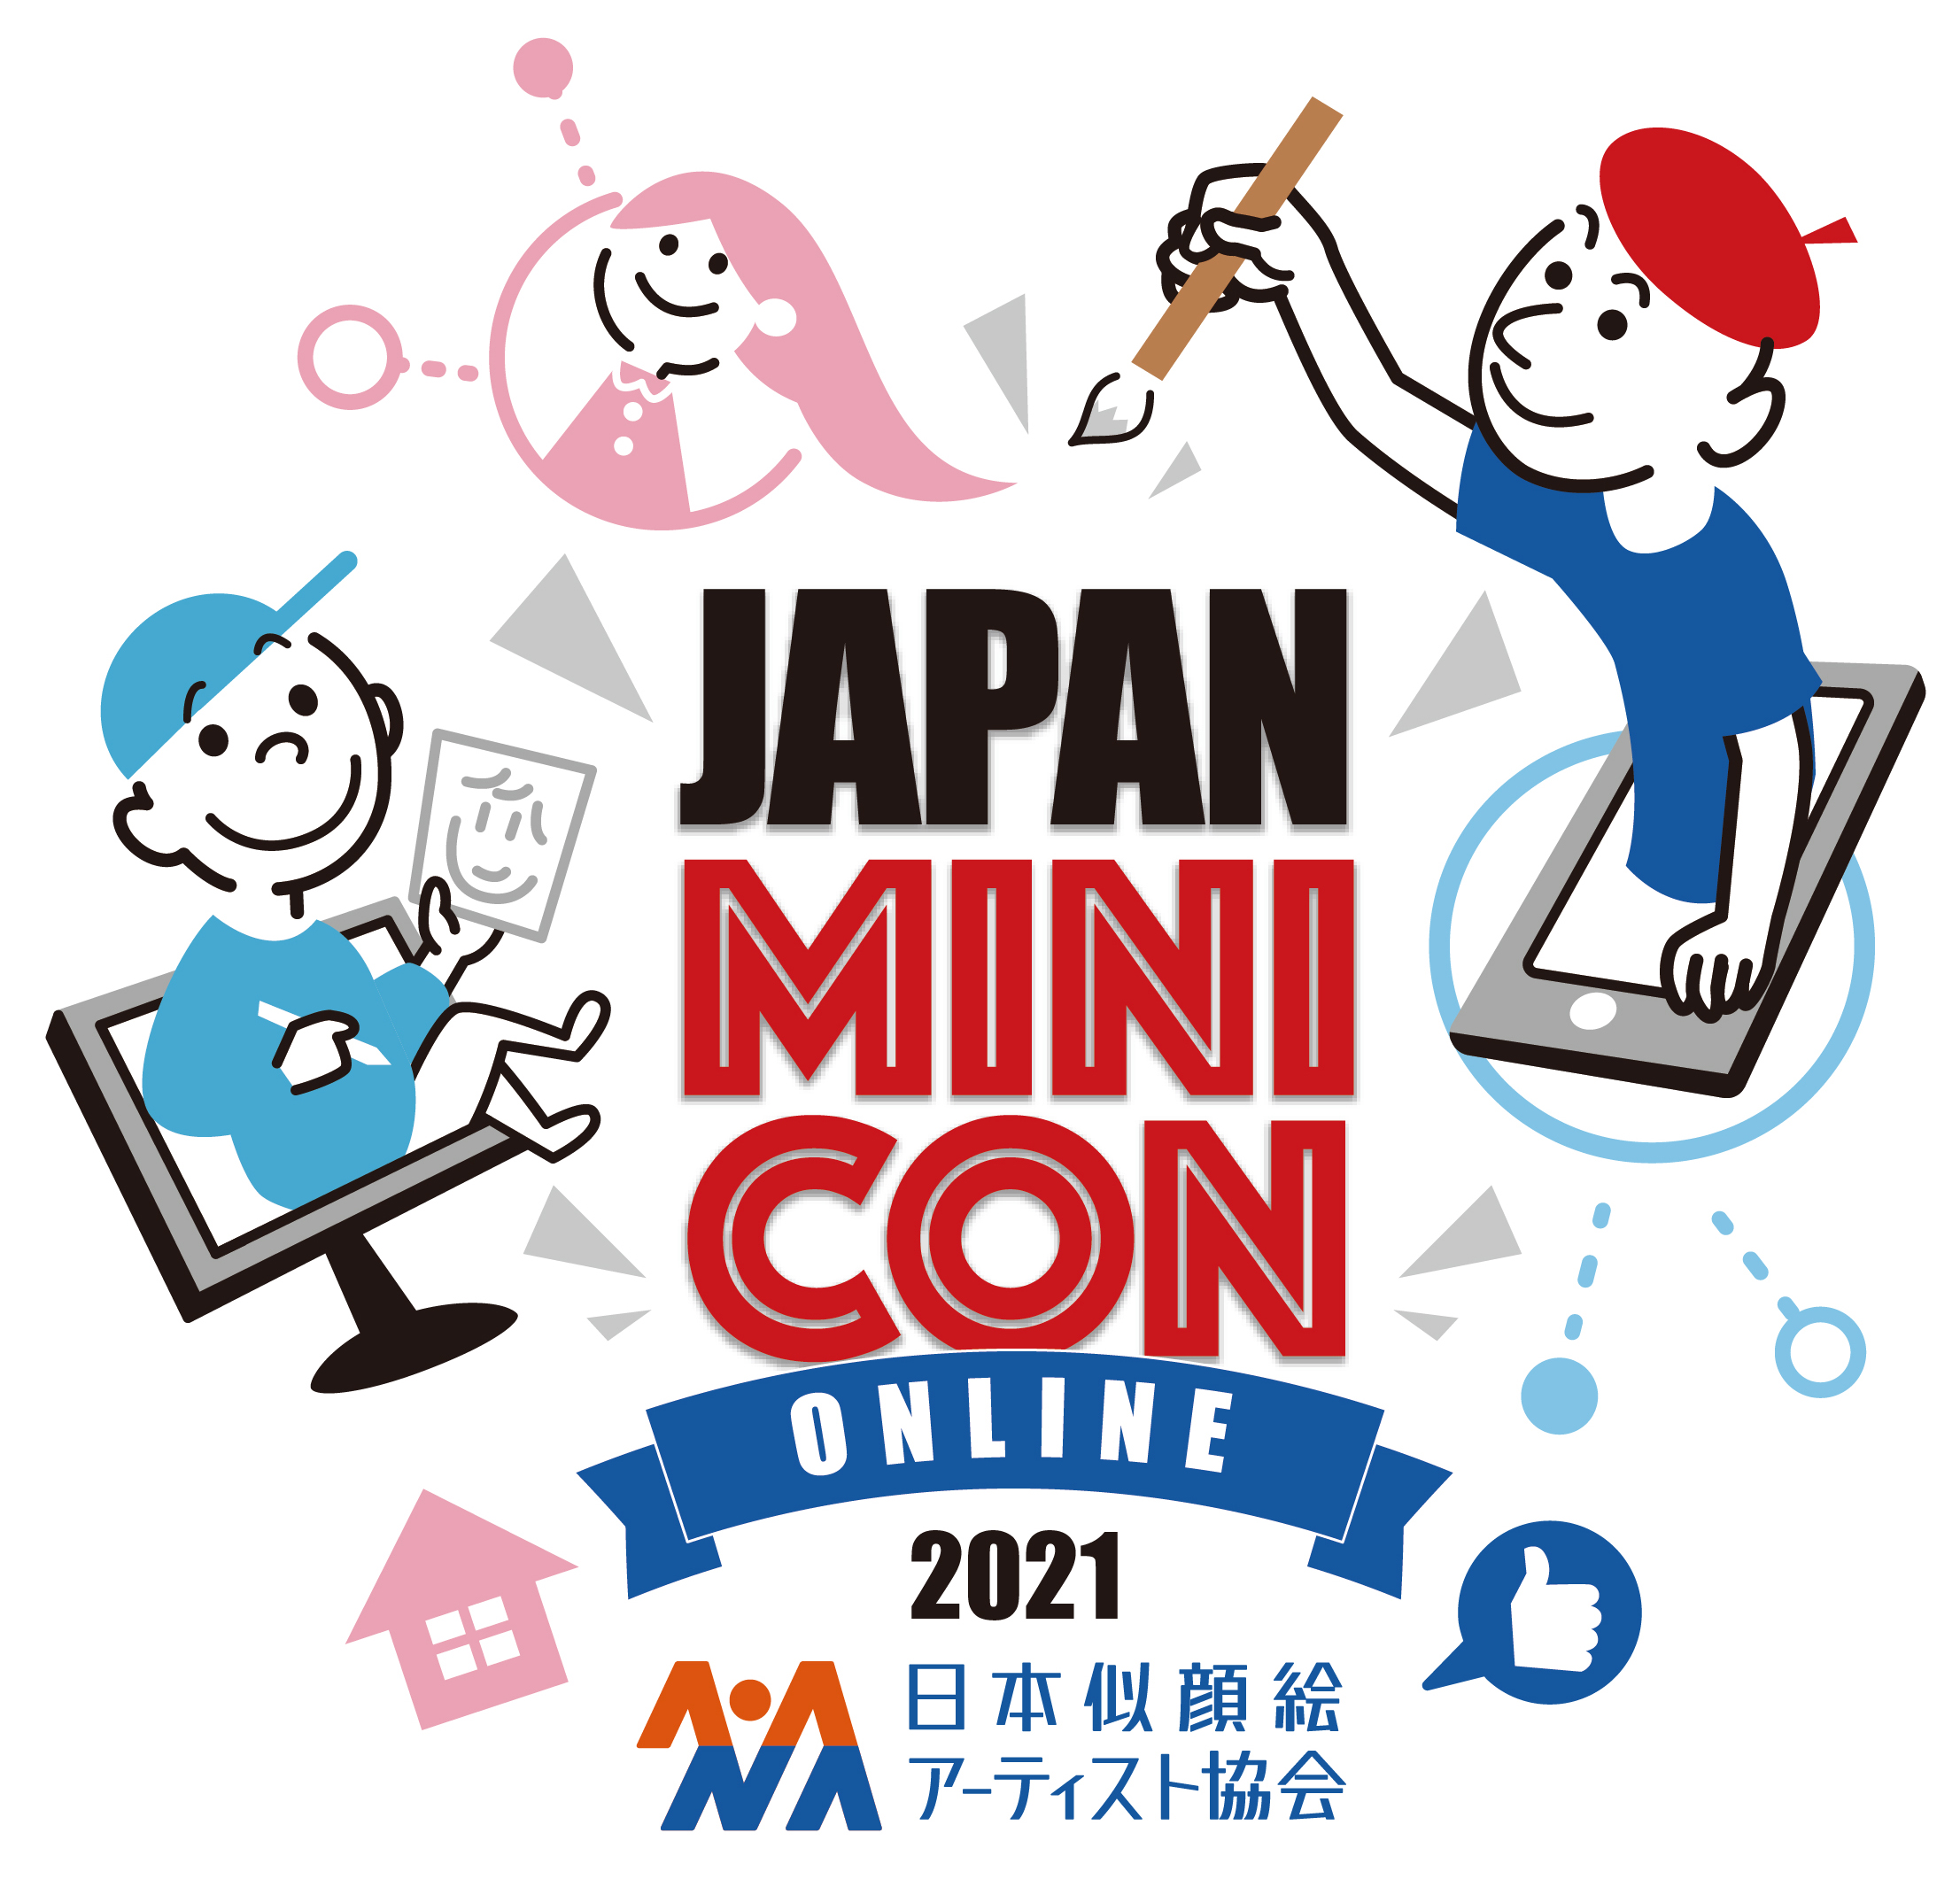 English information about “JAPAN Mini-Con – Online”